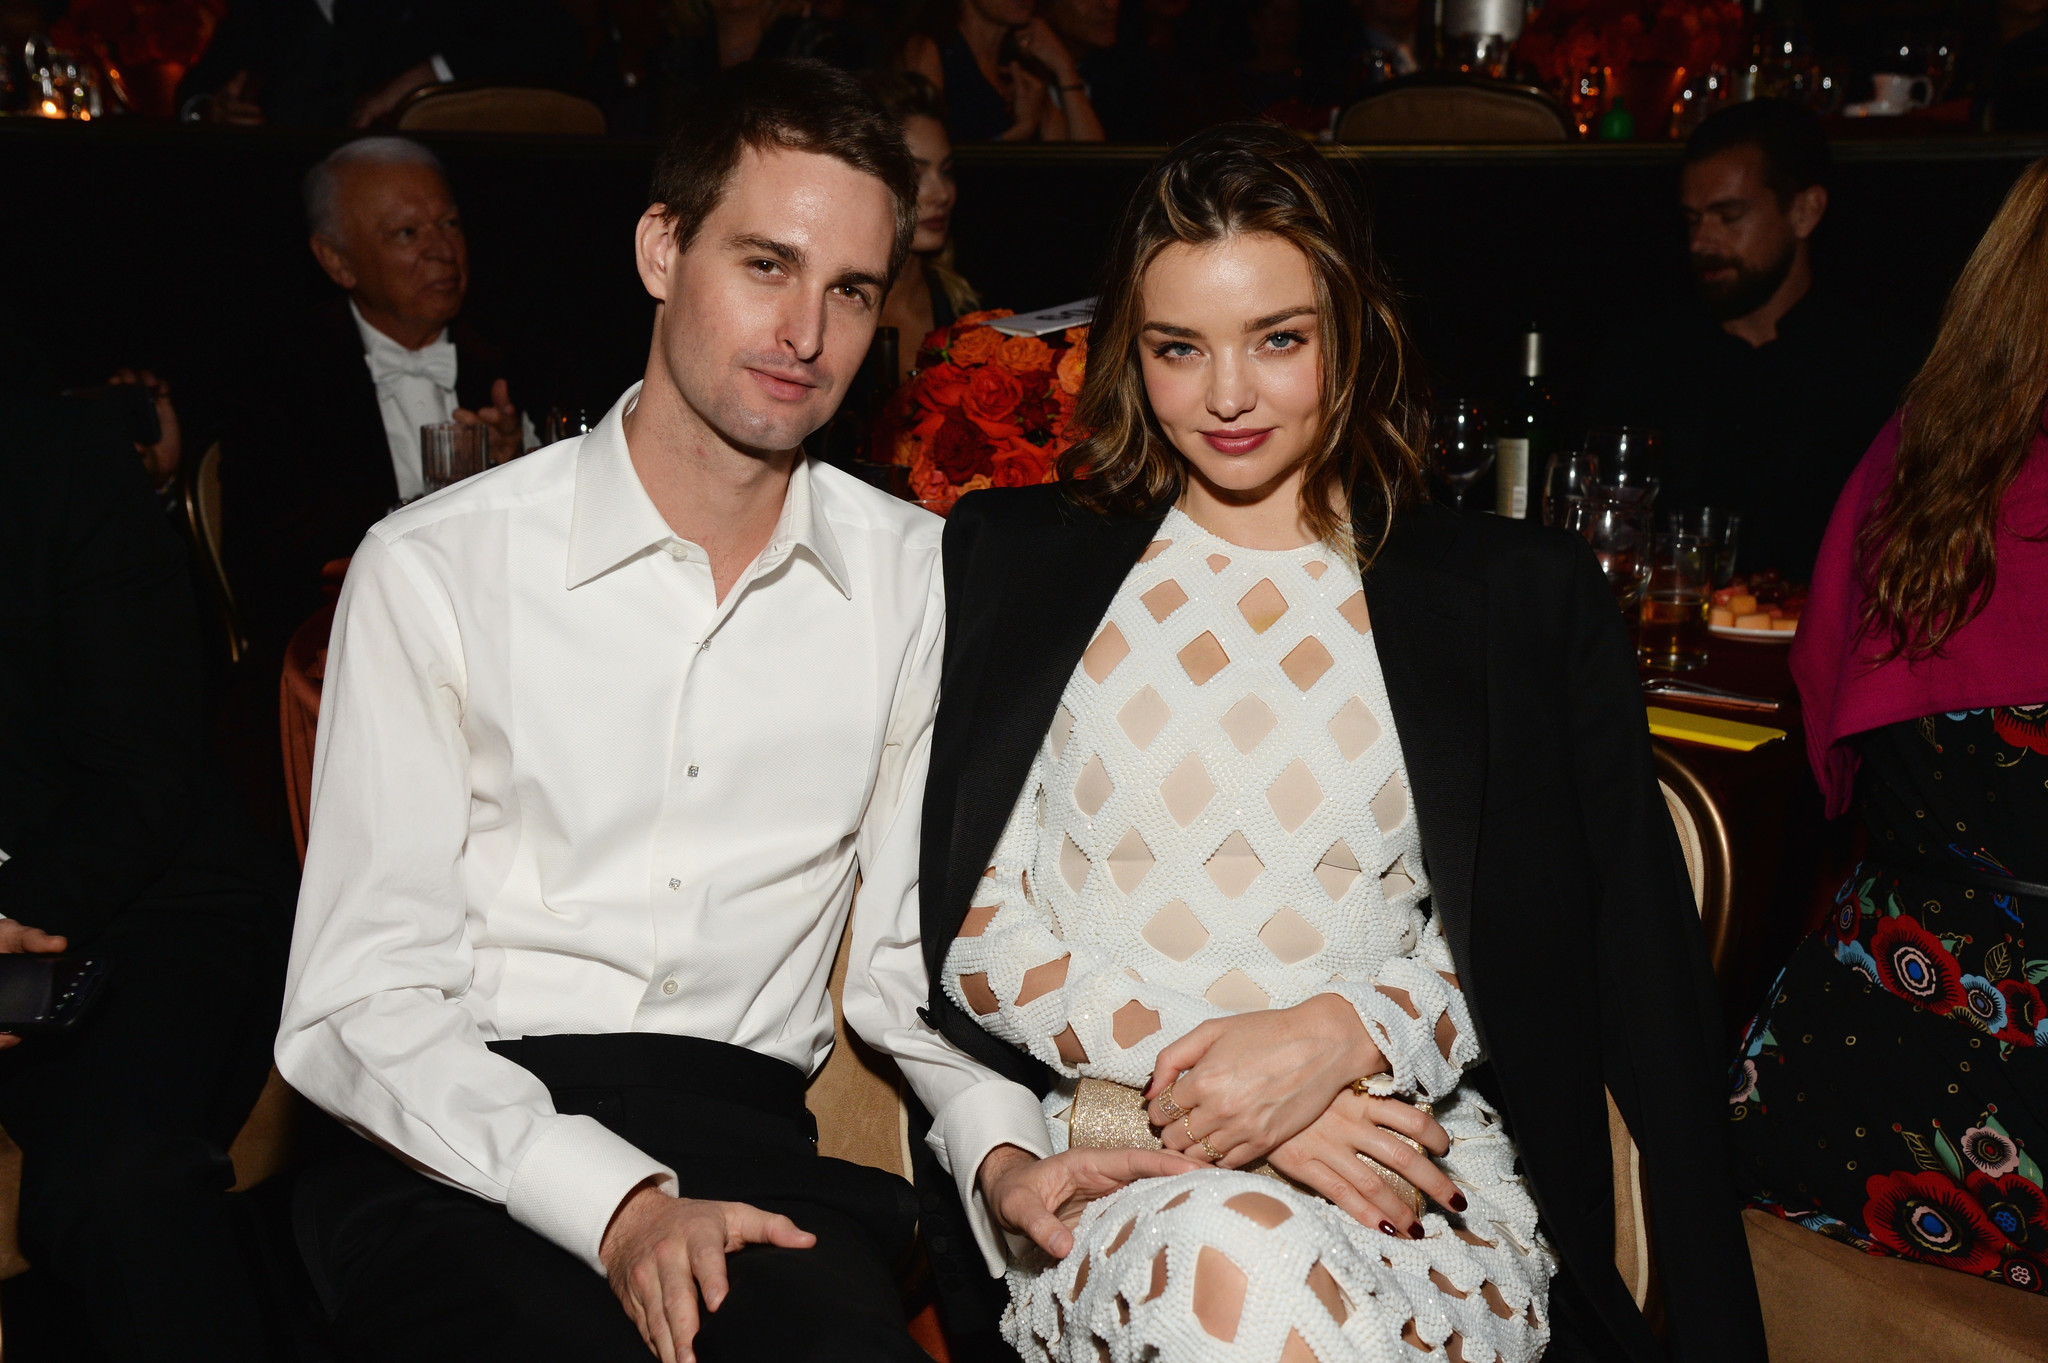 Evan Spiegel and fiancee Miranda Kerr at an event at the Beverly Hilton Hotel last year.